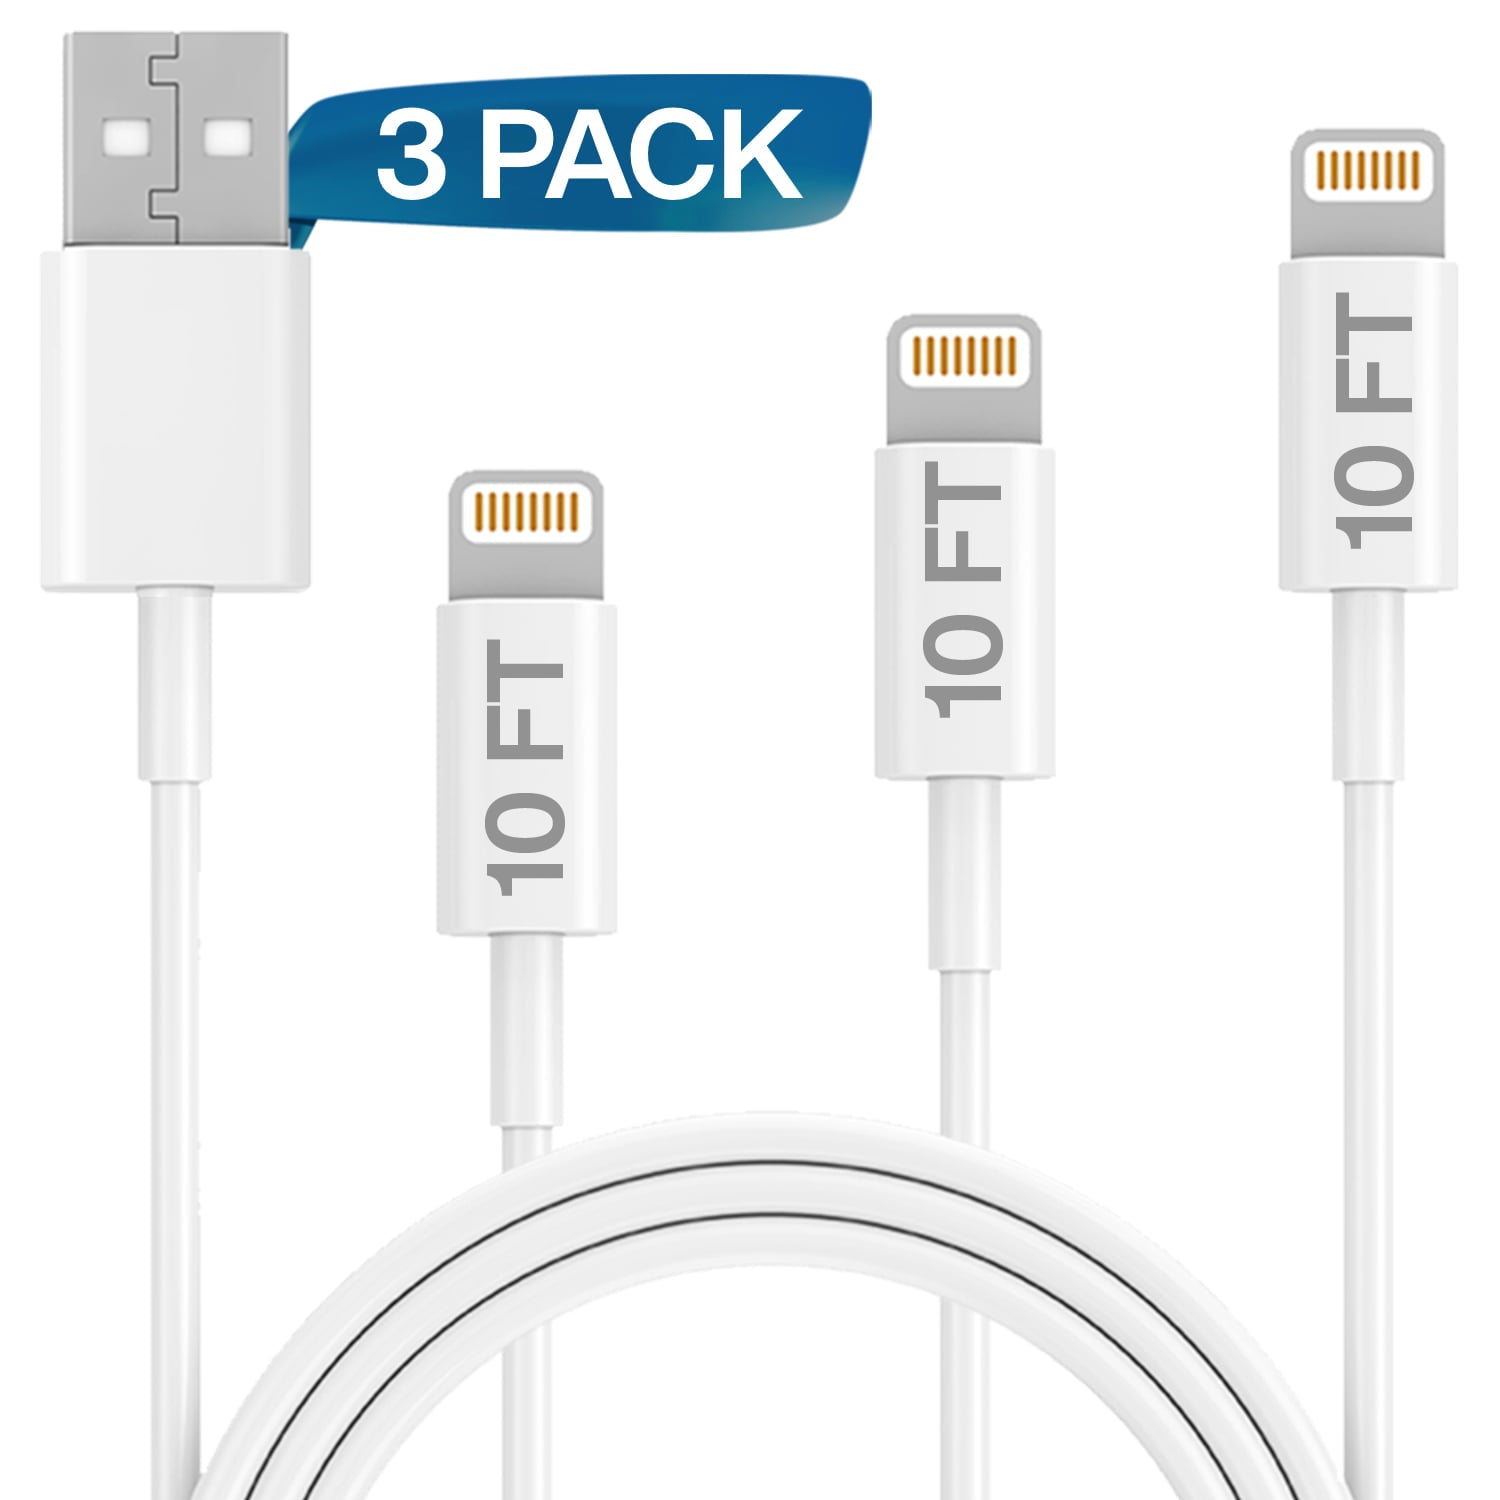 iPhone Charger Lightning Cable - Ixir, 3 Pack 10FT USB Cable, For Apple iPhone Xs,Xs Max,XR,X,8,8 Plus,7,7 Plus,6S,6S Plus,iPad Air,Mini,iPod Touch,Case Original Size